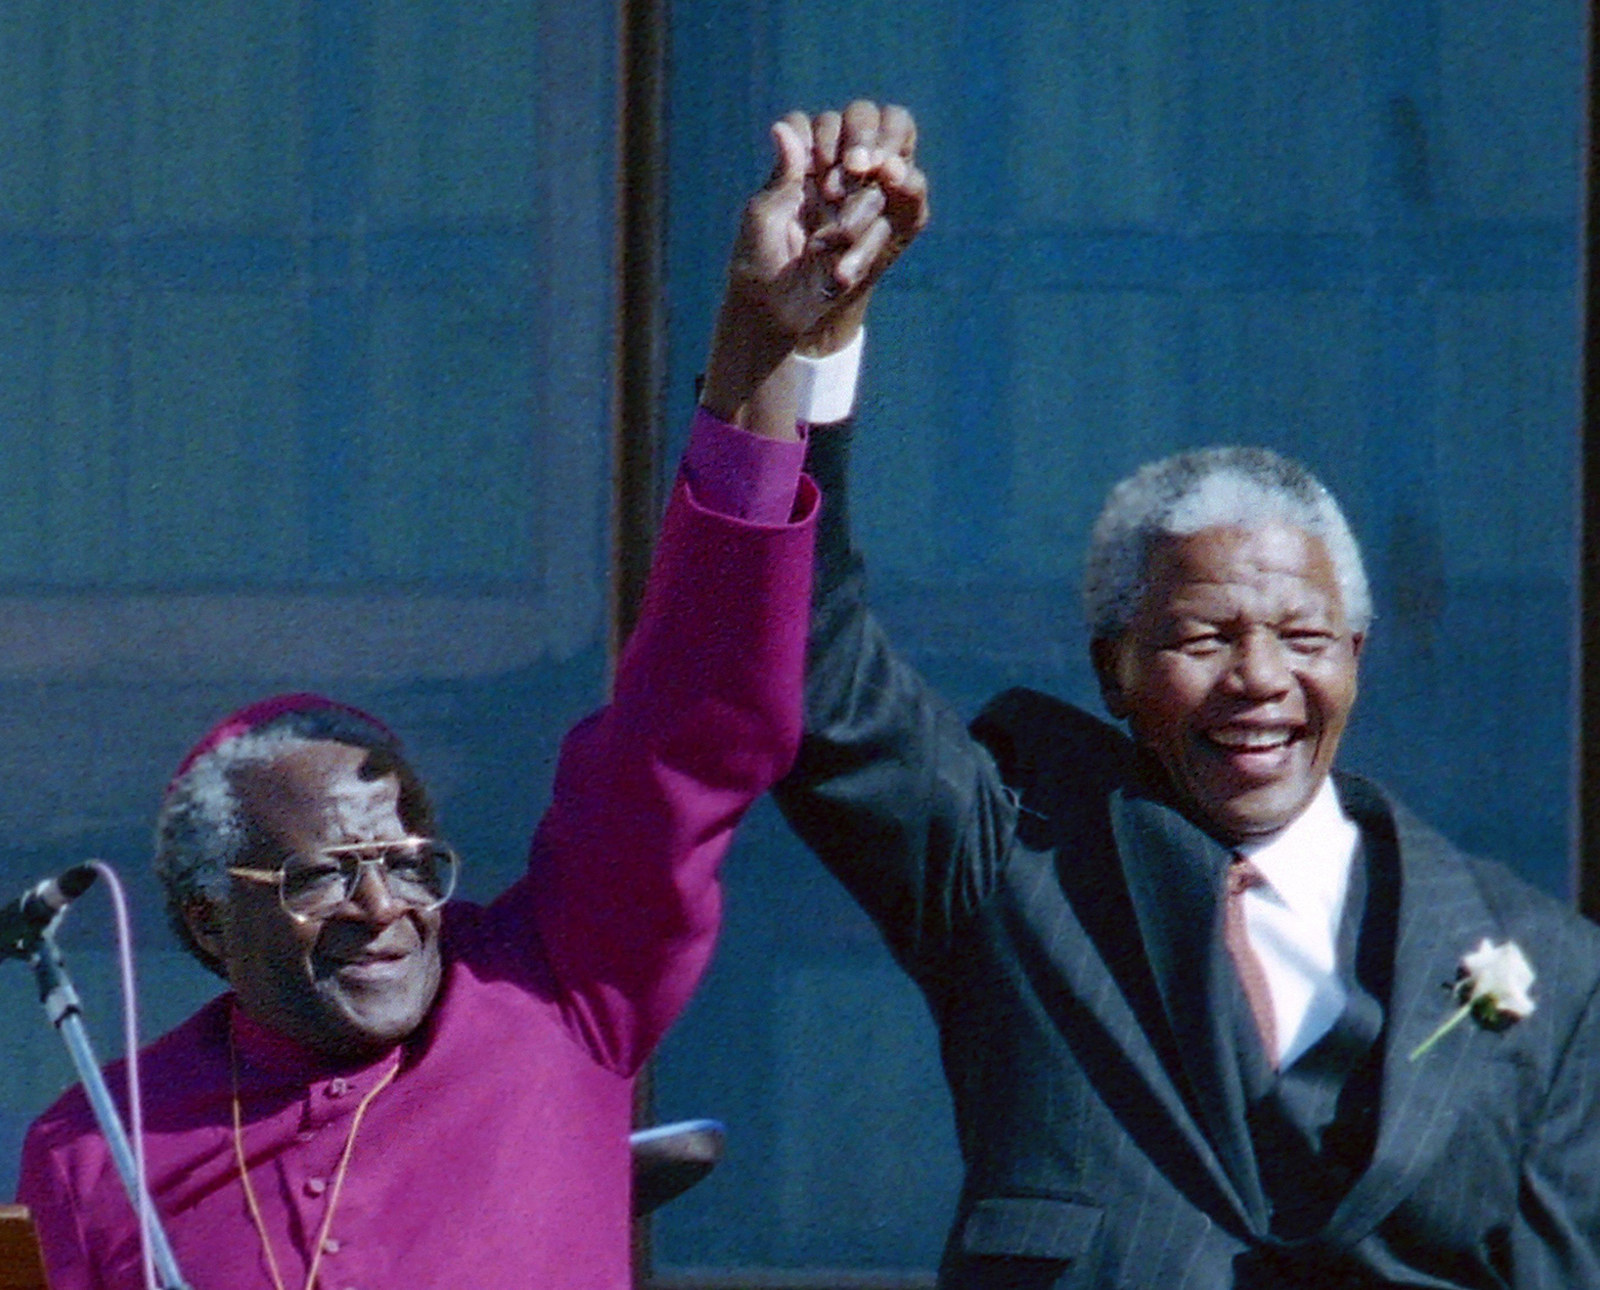 A smiling Tutu and Mandela stand together with raised hands clasped 